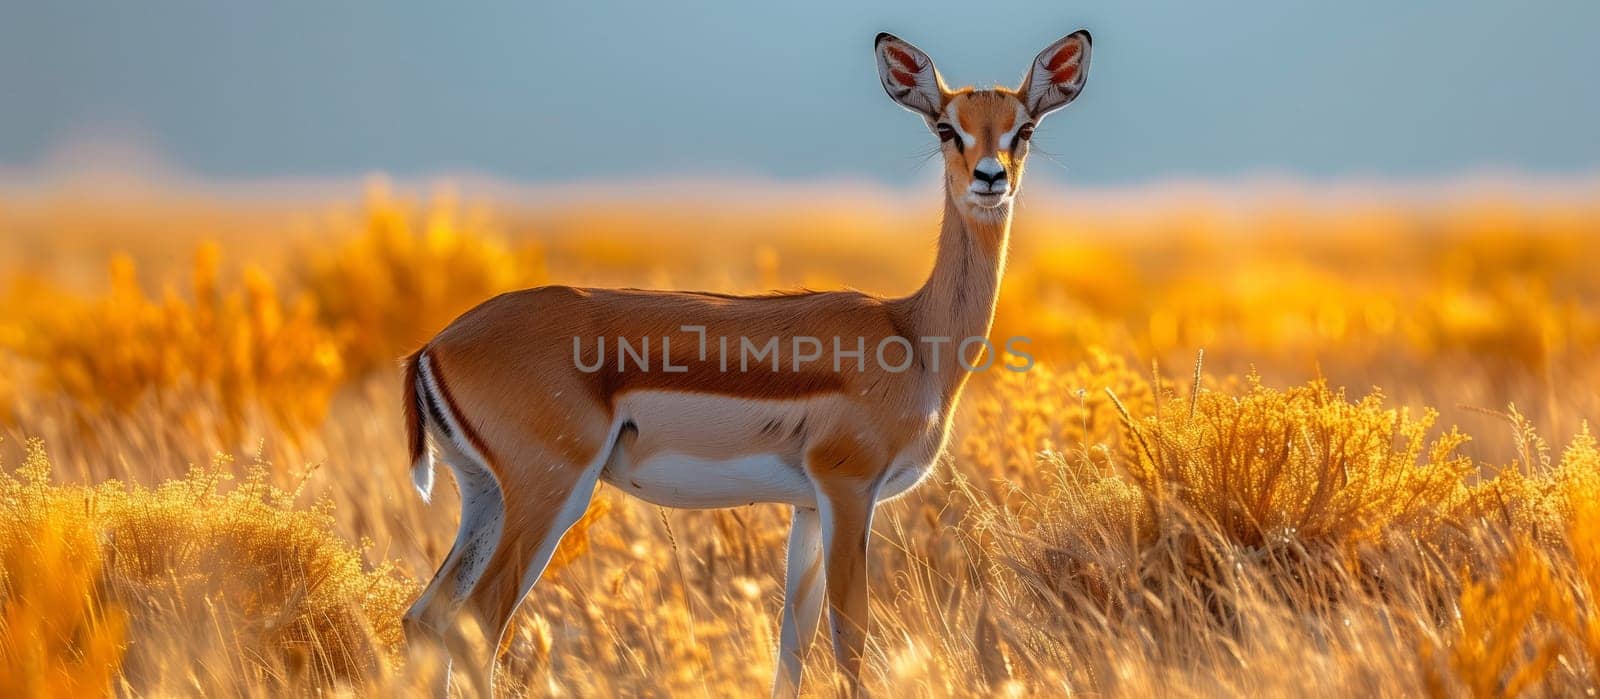 A terrestrial animal, the deer, is found in a grassland ecoregion. It stands in a natural landscape of tall grass, adapting to its plain surroundings while a fawn grazes nearby